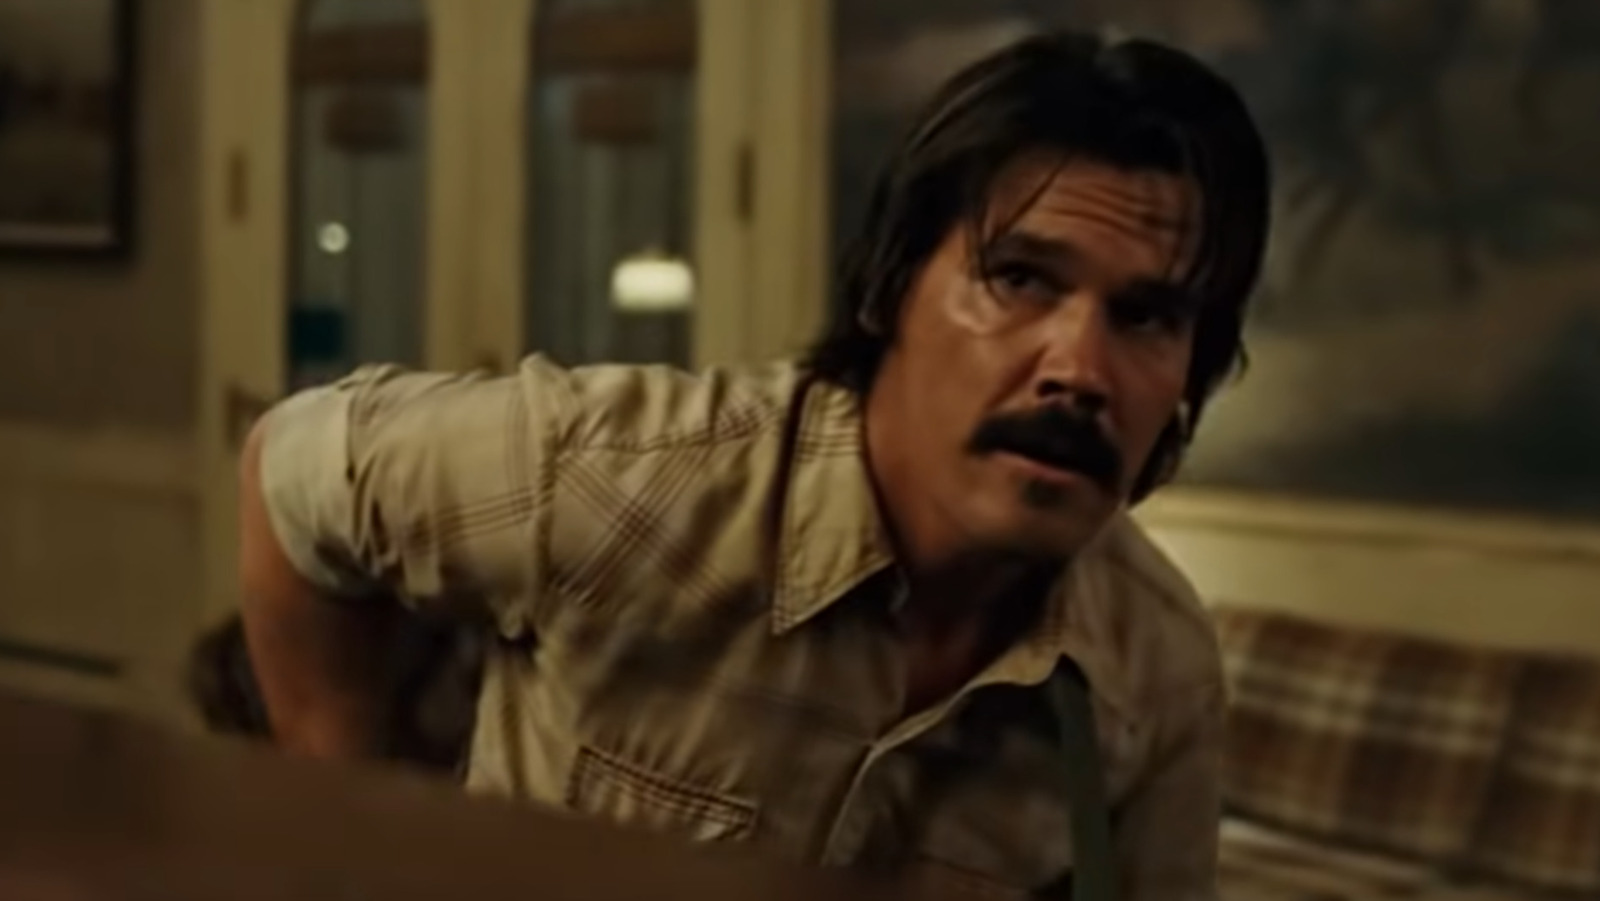 Watch Josh Brolin's Unauthorized Coen Brothers Doc on 'No Country